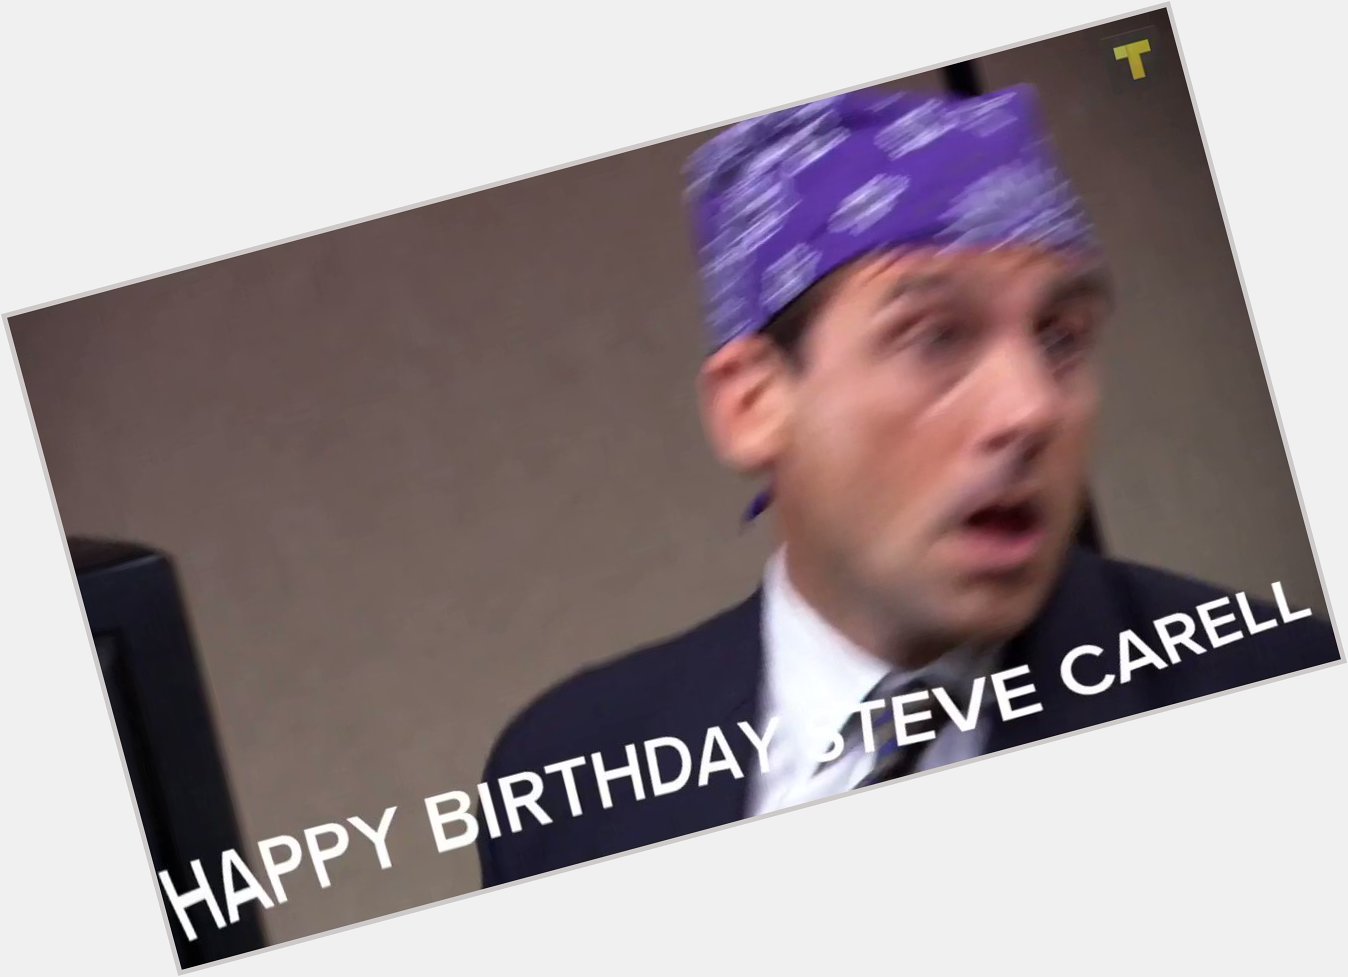 Happy Birthday to the king: Steve Carell 